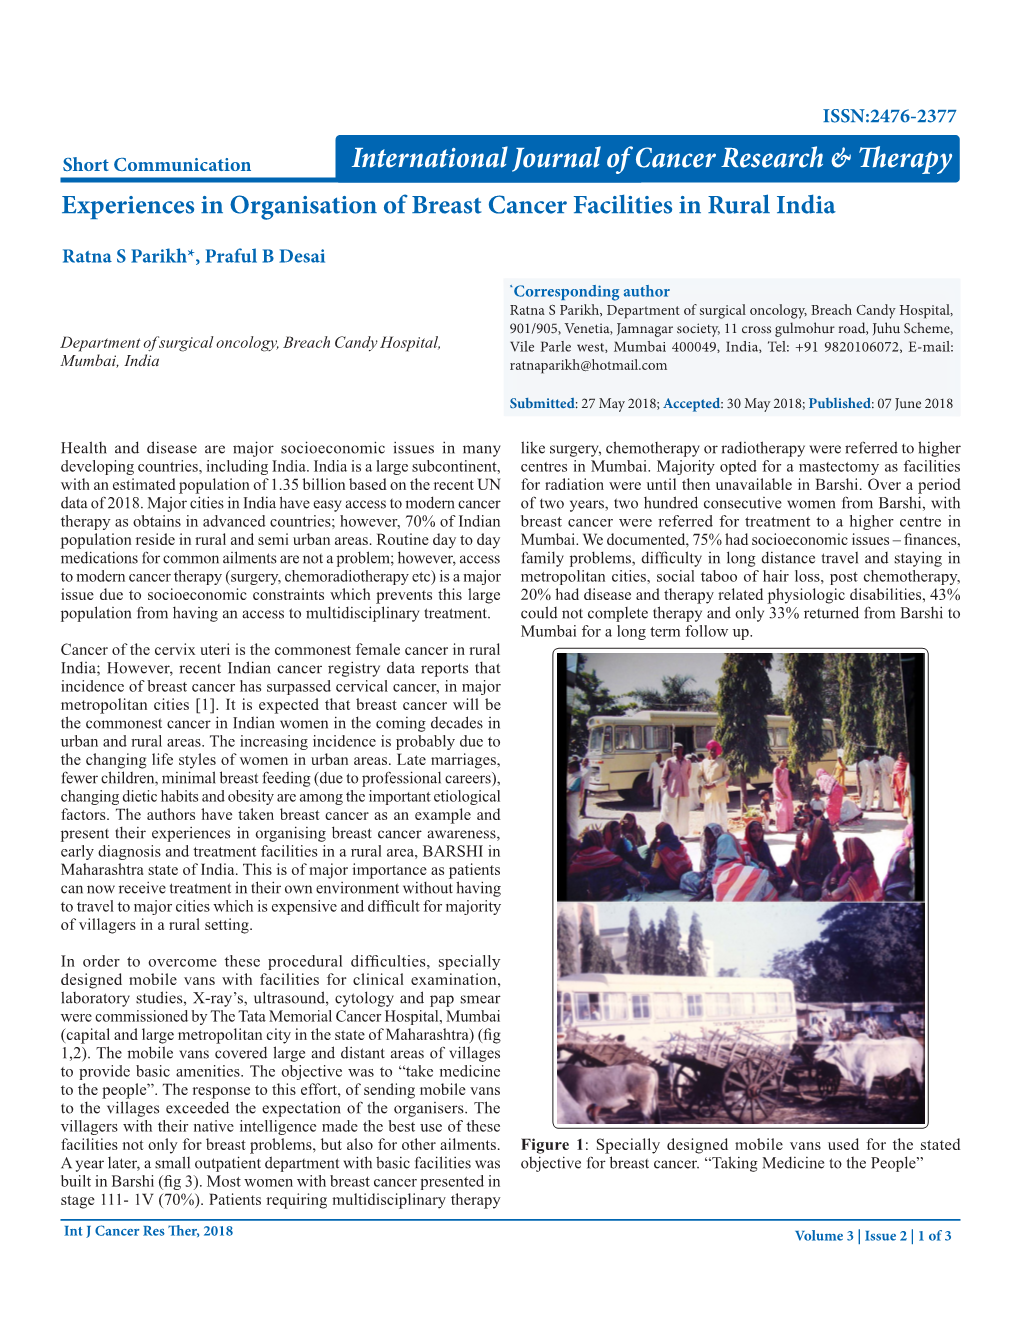 Experiences in Organisation of Breast Cancer Facilities in Rural India